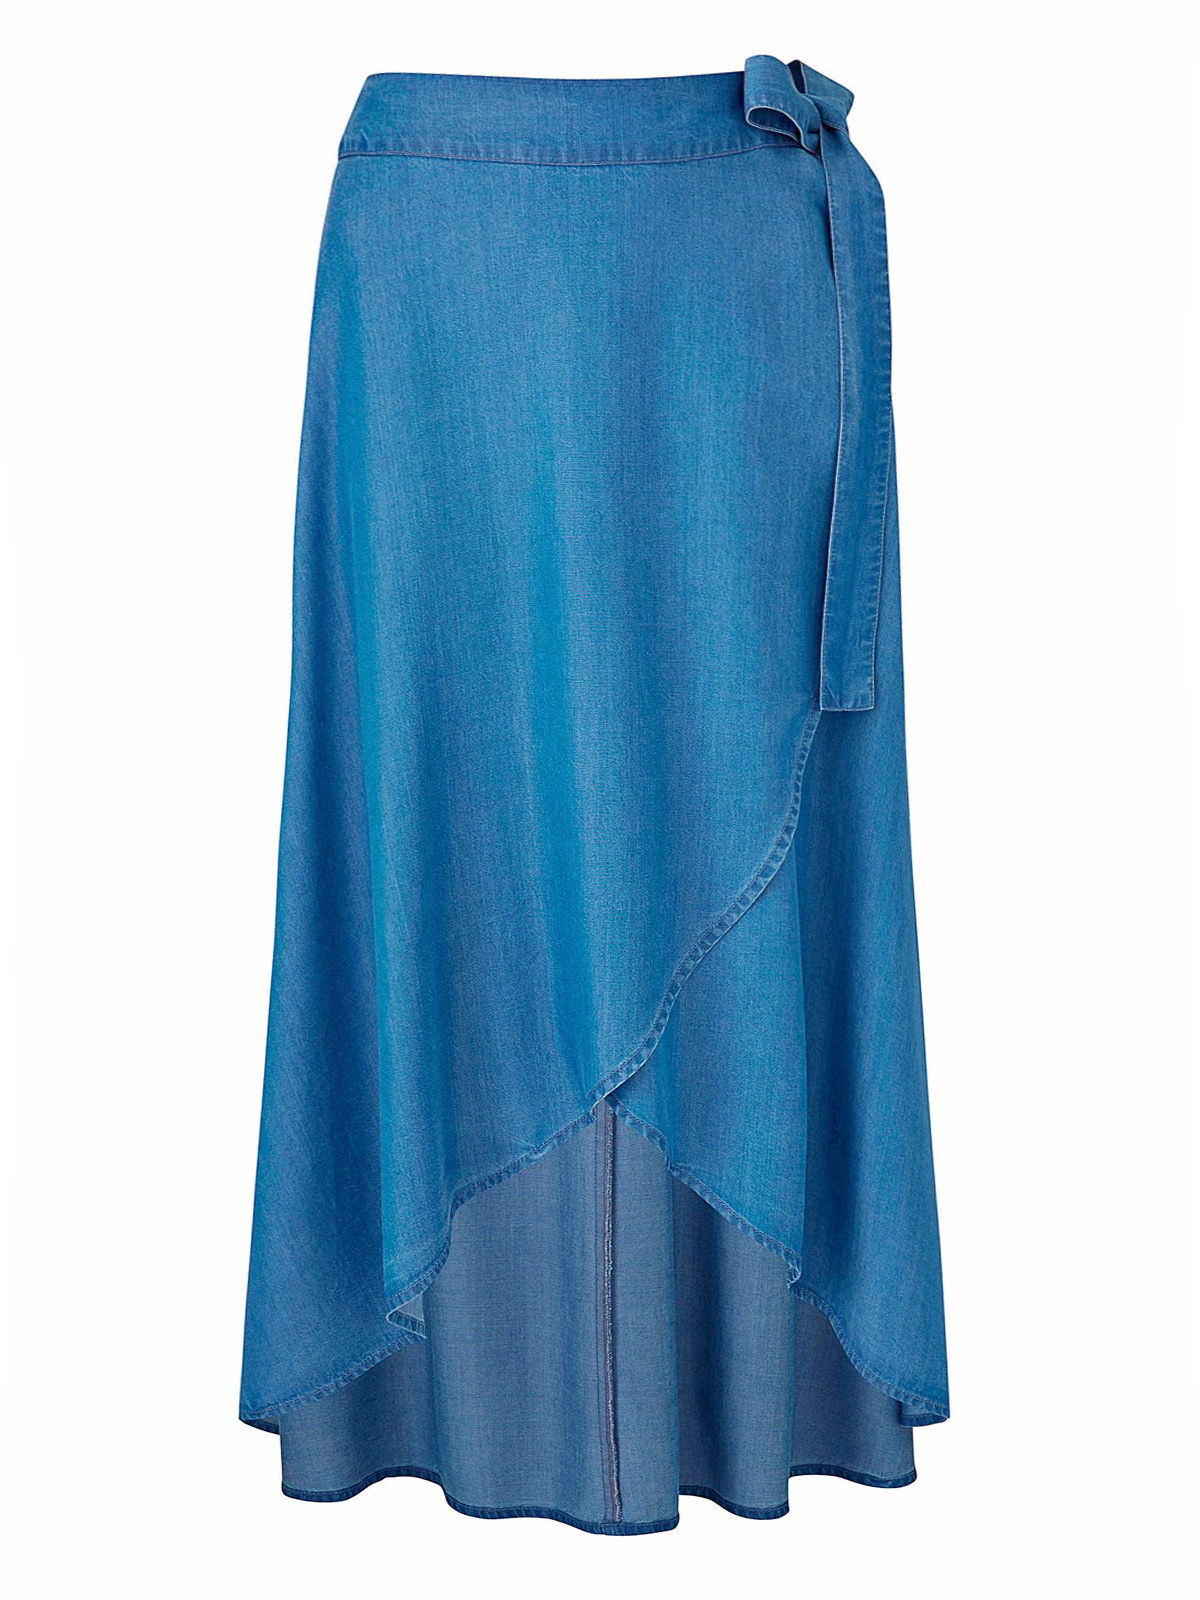 Plus Size Wholesale Clothing By Simply Be Simplybe Mid Blue Soft Tencel Denim Floaty Wrap 2353